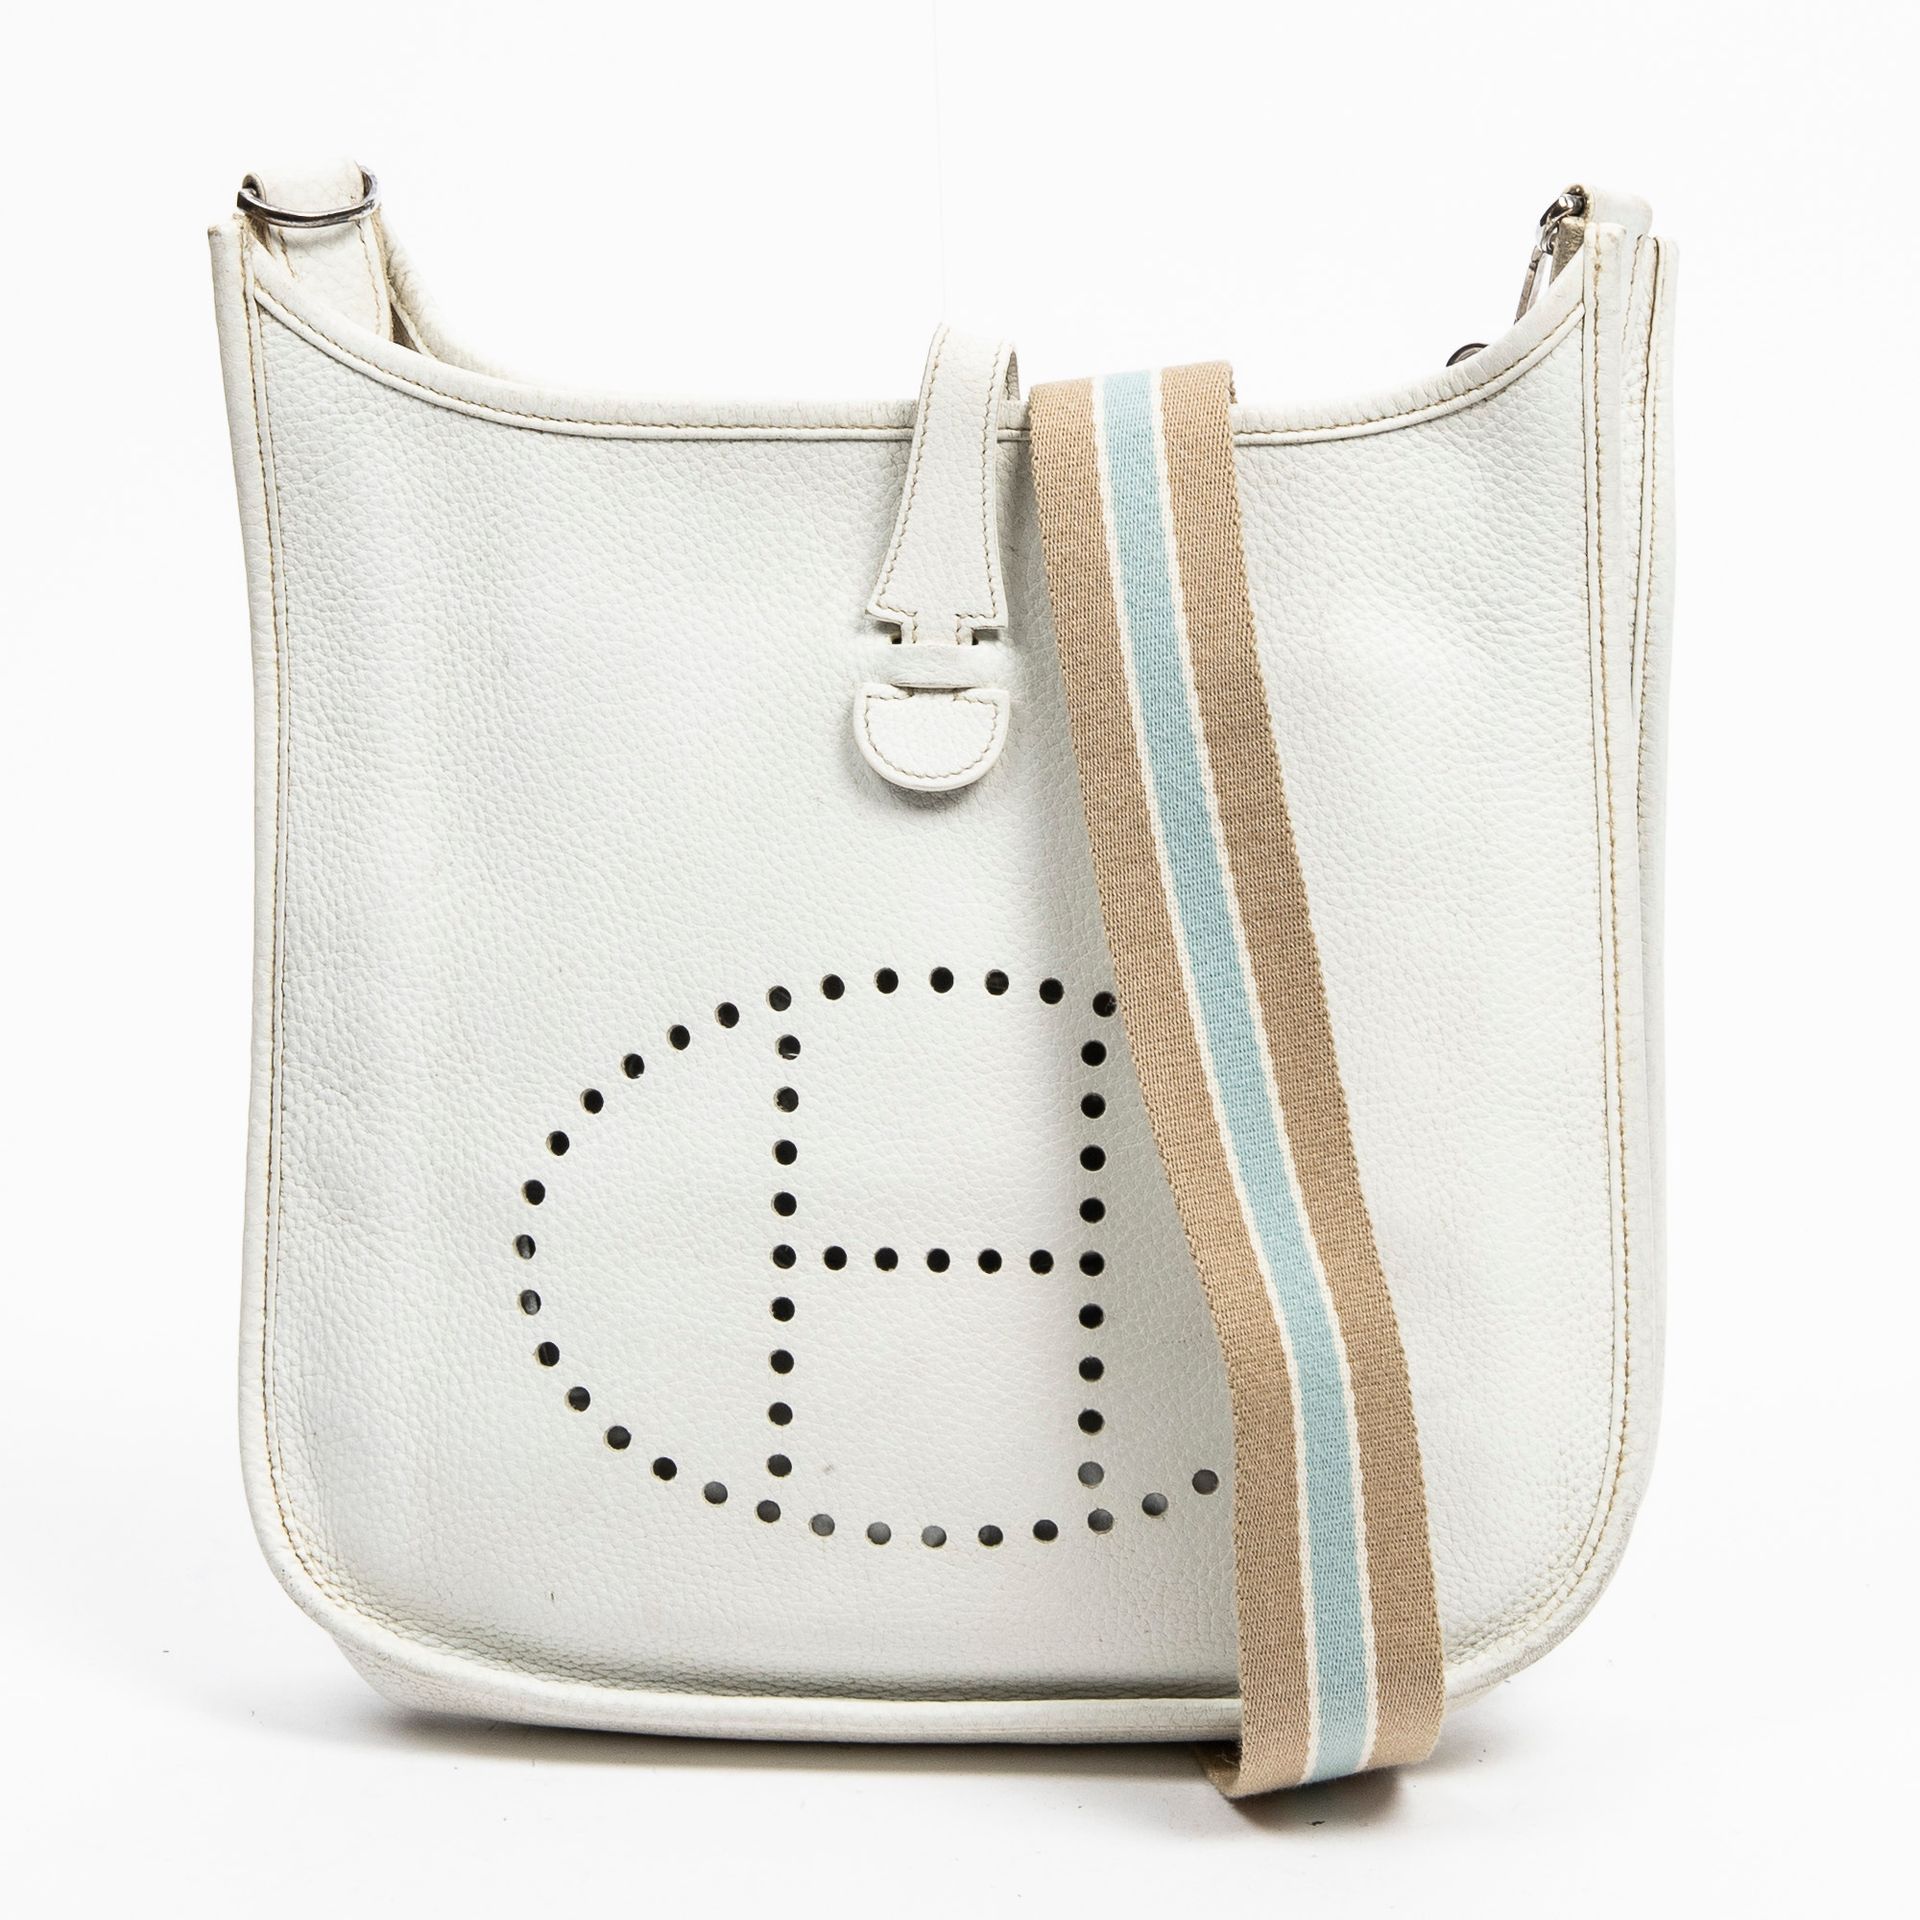 Hermès HERMES - Evelyne 1 bag in white grained calfskin - Grey and blue cotton s&hellip;